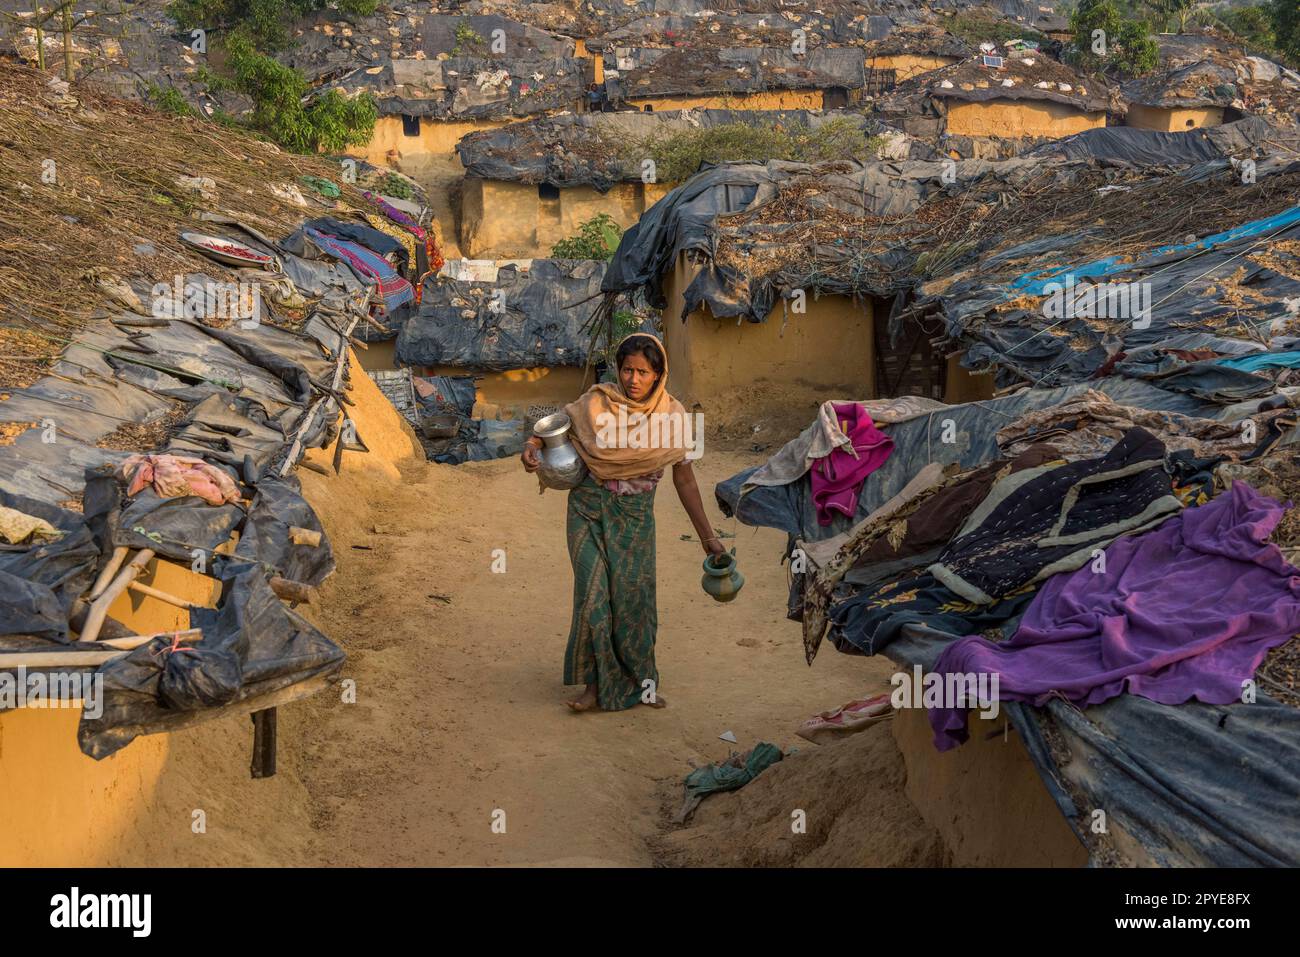 Bangladesh, Cox's Bazar.  A woman collects water at the Kutupalong Rohingya Refugee Camp. March 23, 2017 Editorial use only. Stock Photo